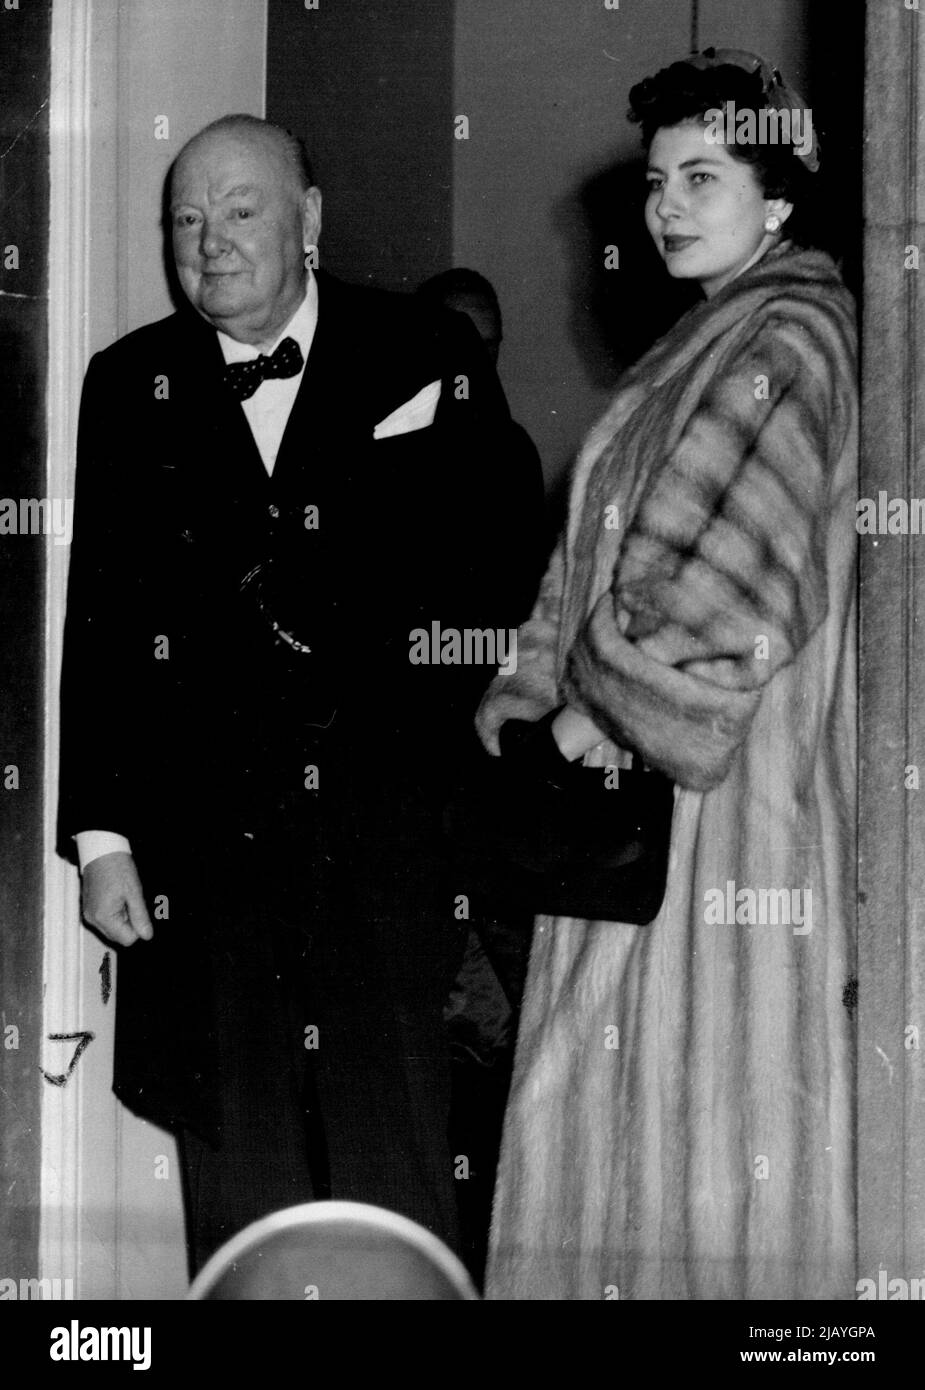 Doorstep Goodbye -- Sir Winston Churchill goes to the Door of No. 10 Downing Street this afternoon to say goodbye to his Guests, the Shah of Persia and Queen Soraya, who had been his guests to lunch. February 21, 1955. (Photo by Paul Popper, Paul Popper Ltd.). Stock Photo